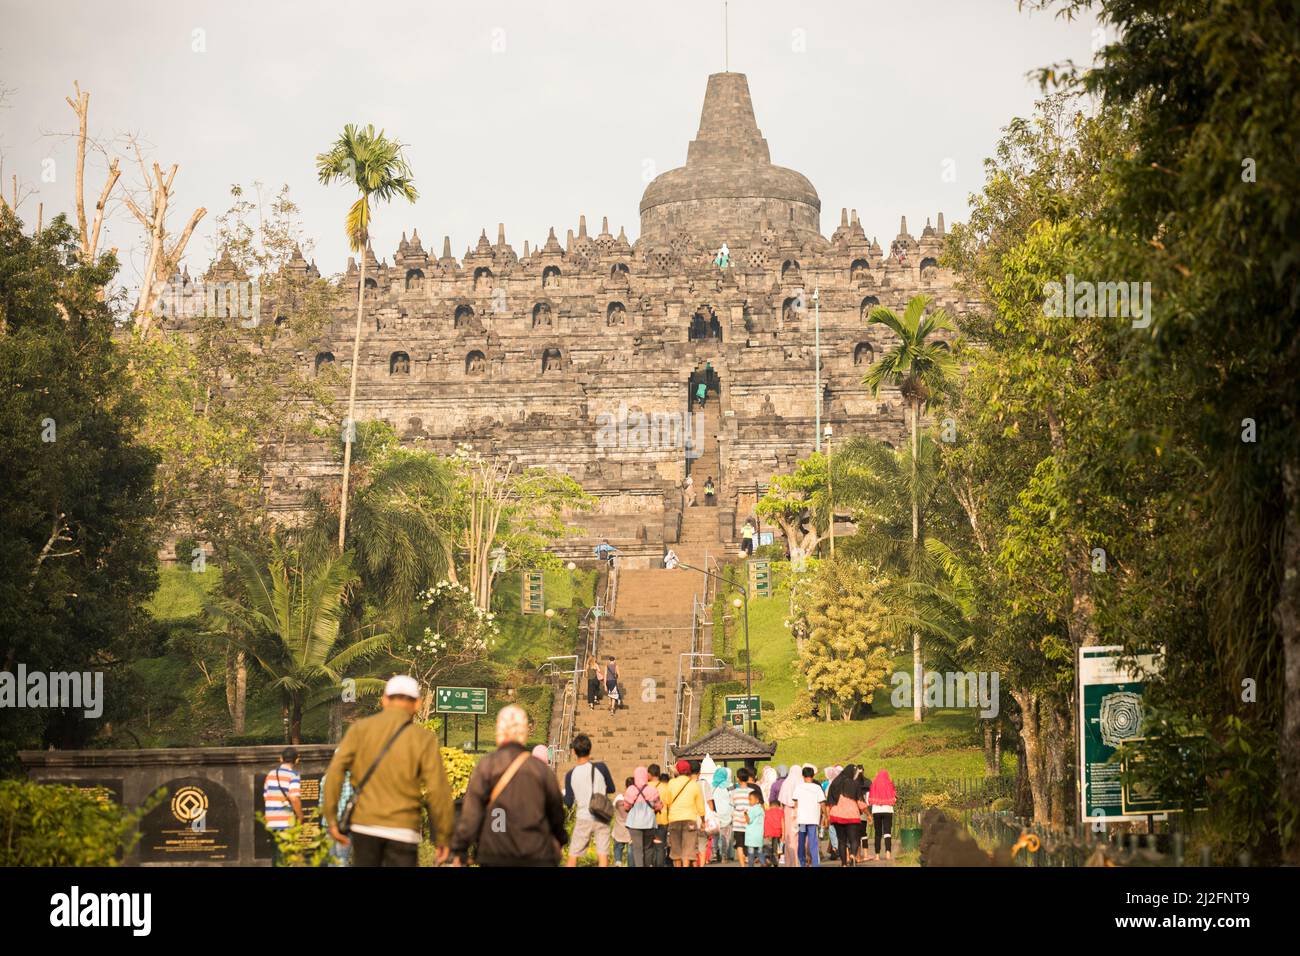 Borobudur is a 9th century Buddhist temple in Central Java, Indonesia. March 3, 2018. Millennium Challenge Corporation Indonesia Compact. Photo by Jak Stock Photo